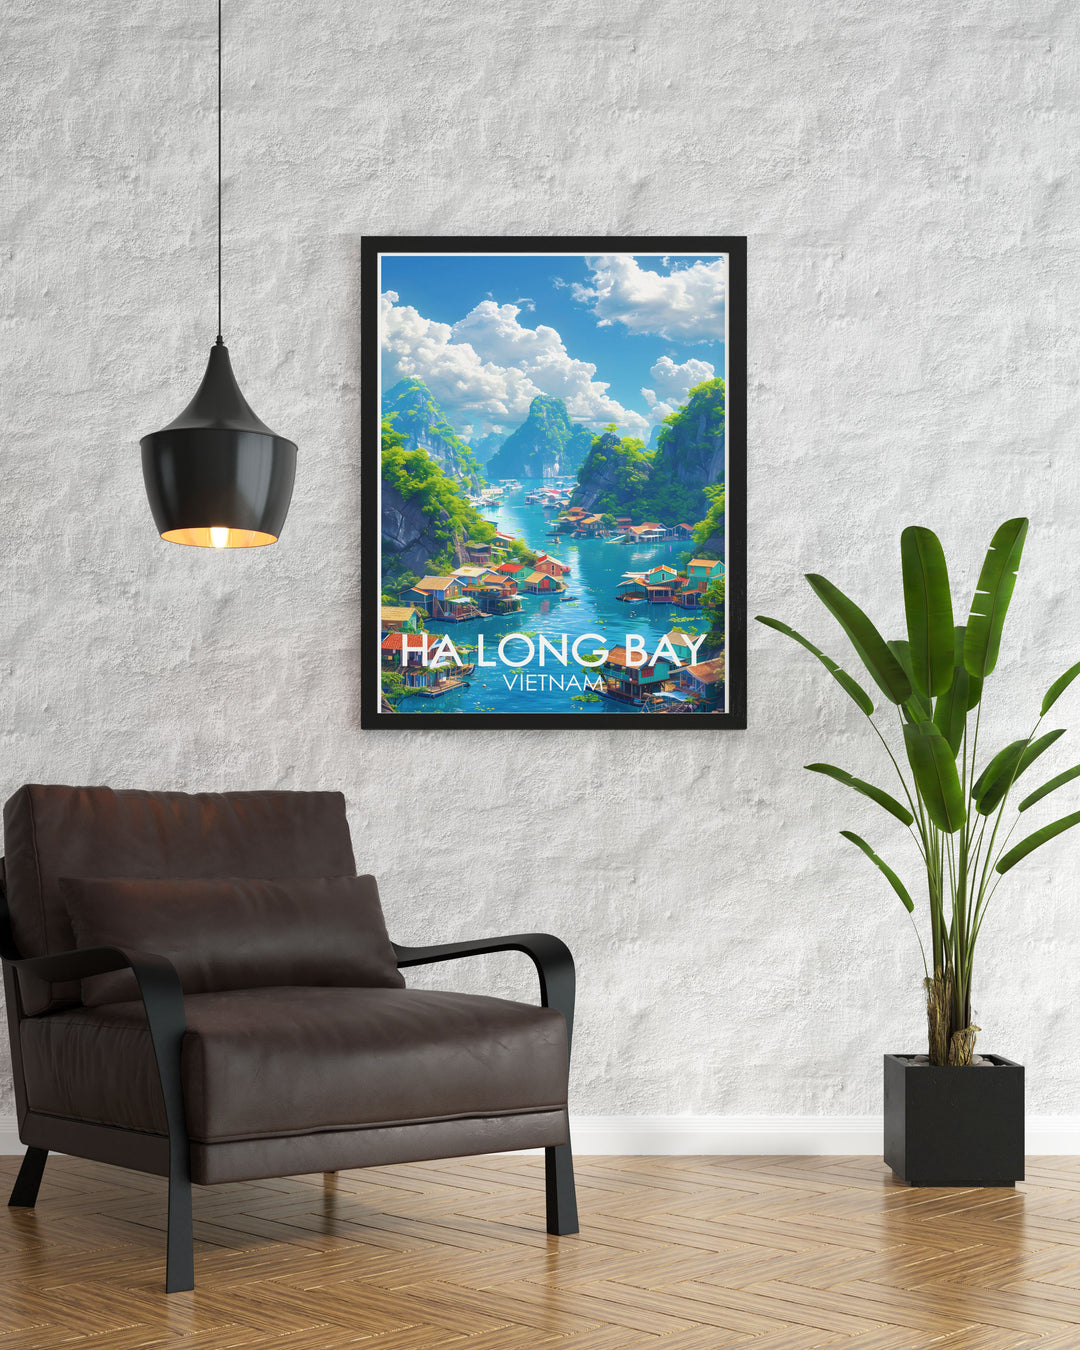 Capturing the rich cultural heritage and stunning scenery of Ha Long Bay, this travel poster showcases the beauty and tranquil spirit of Vietnam, making it a unique addition to your home decor.